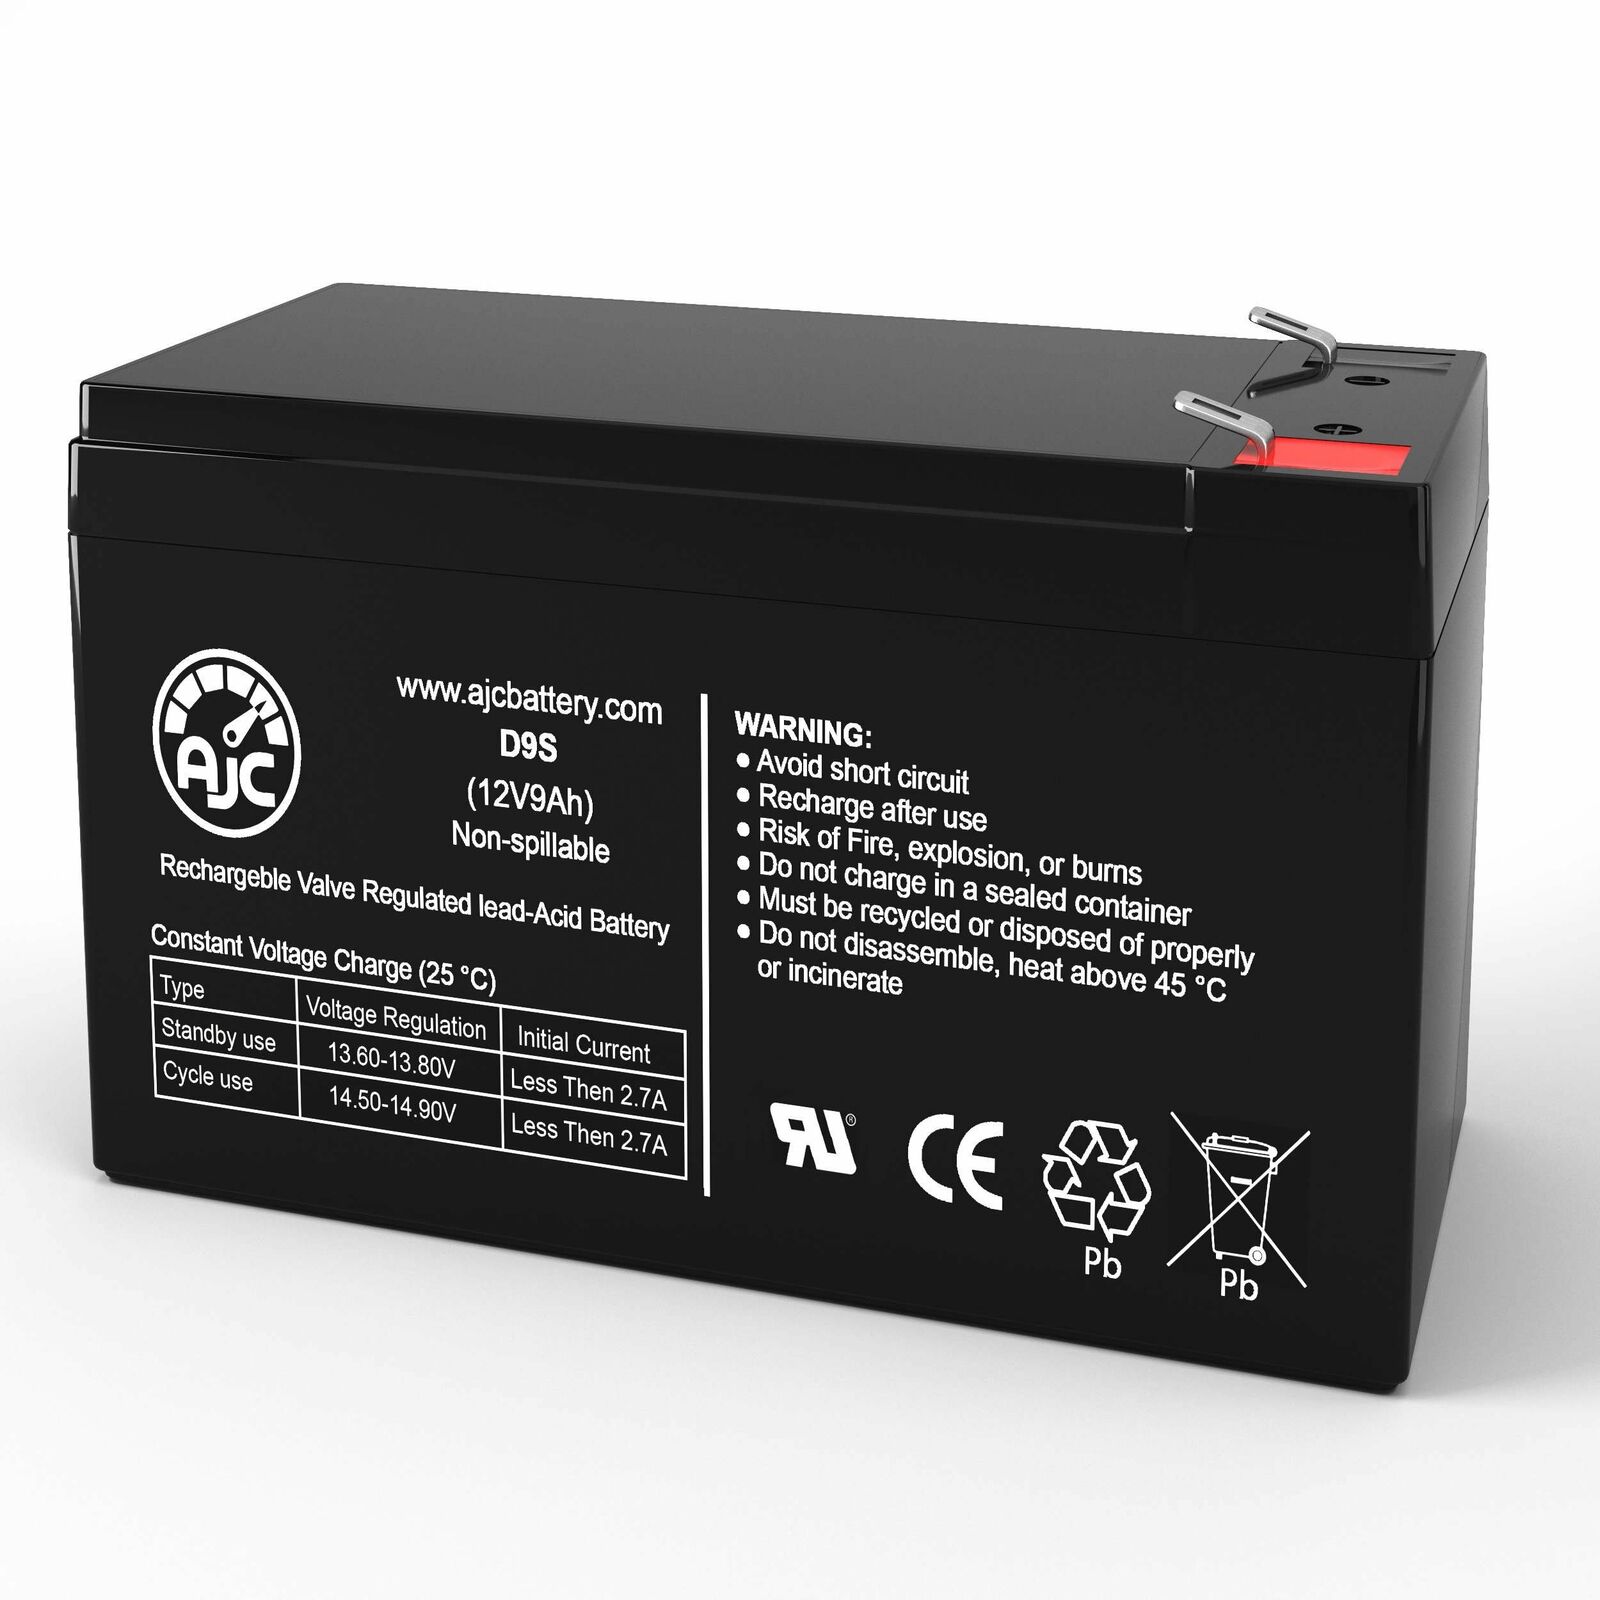 APC Back-UPS RS 1500 LCD (BR1500LCD) 12V 9Ah UPS Replacement Battery